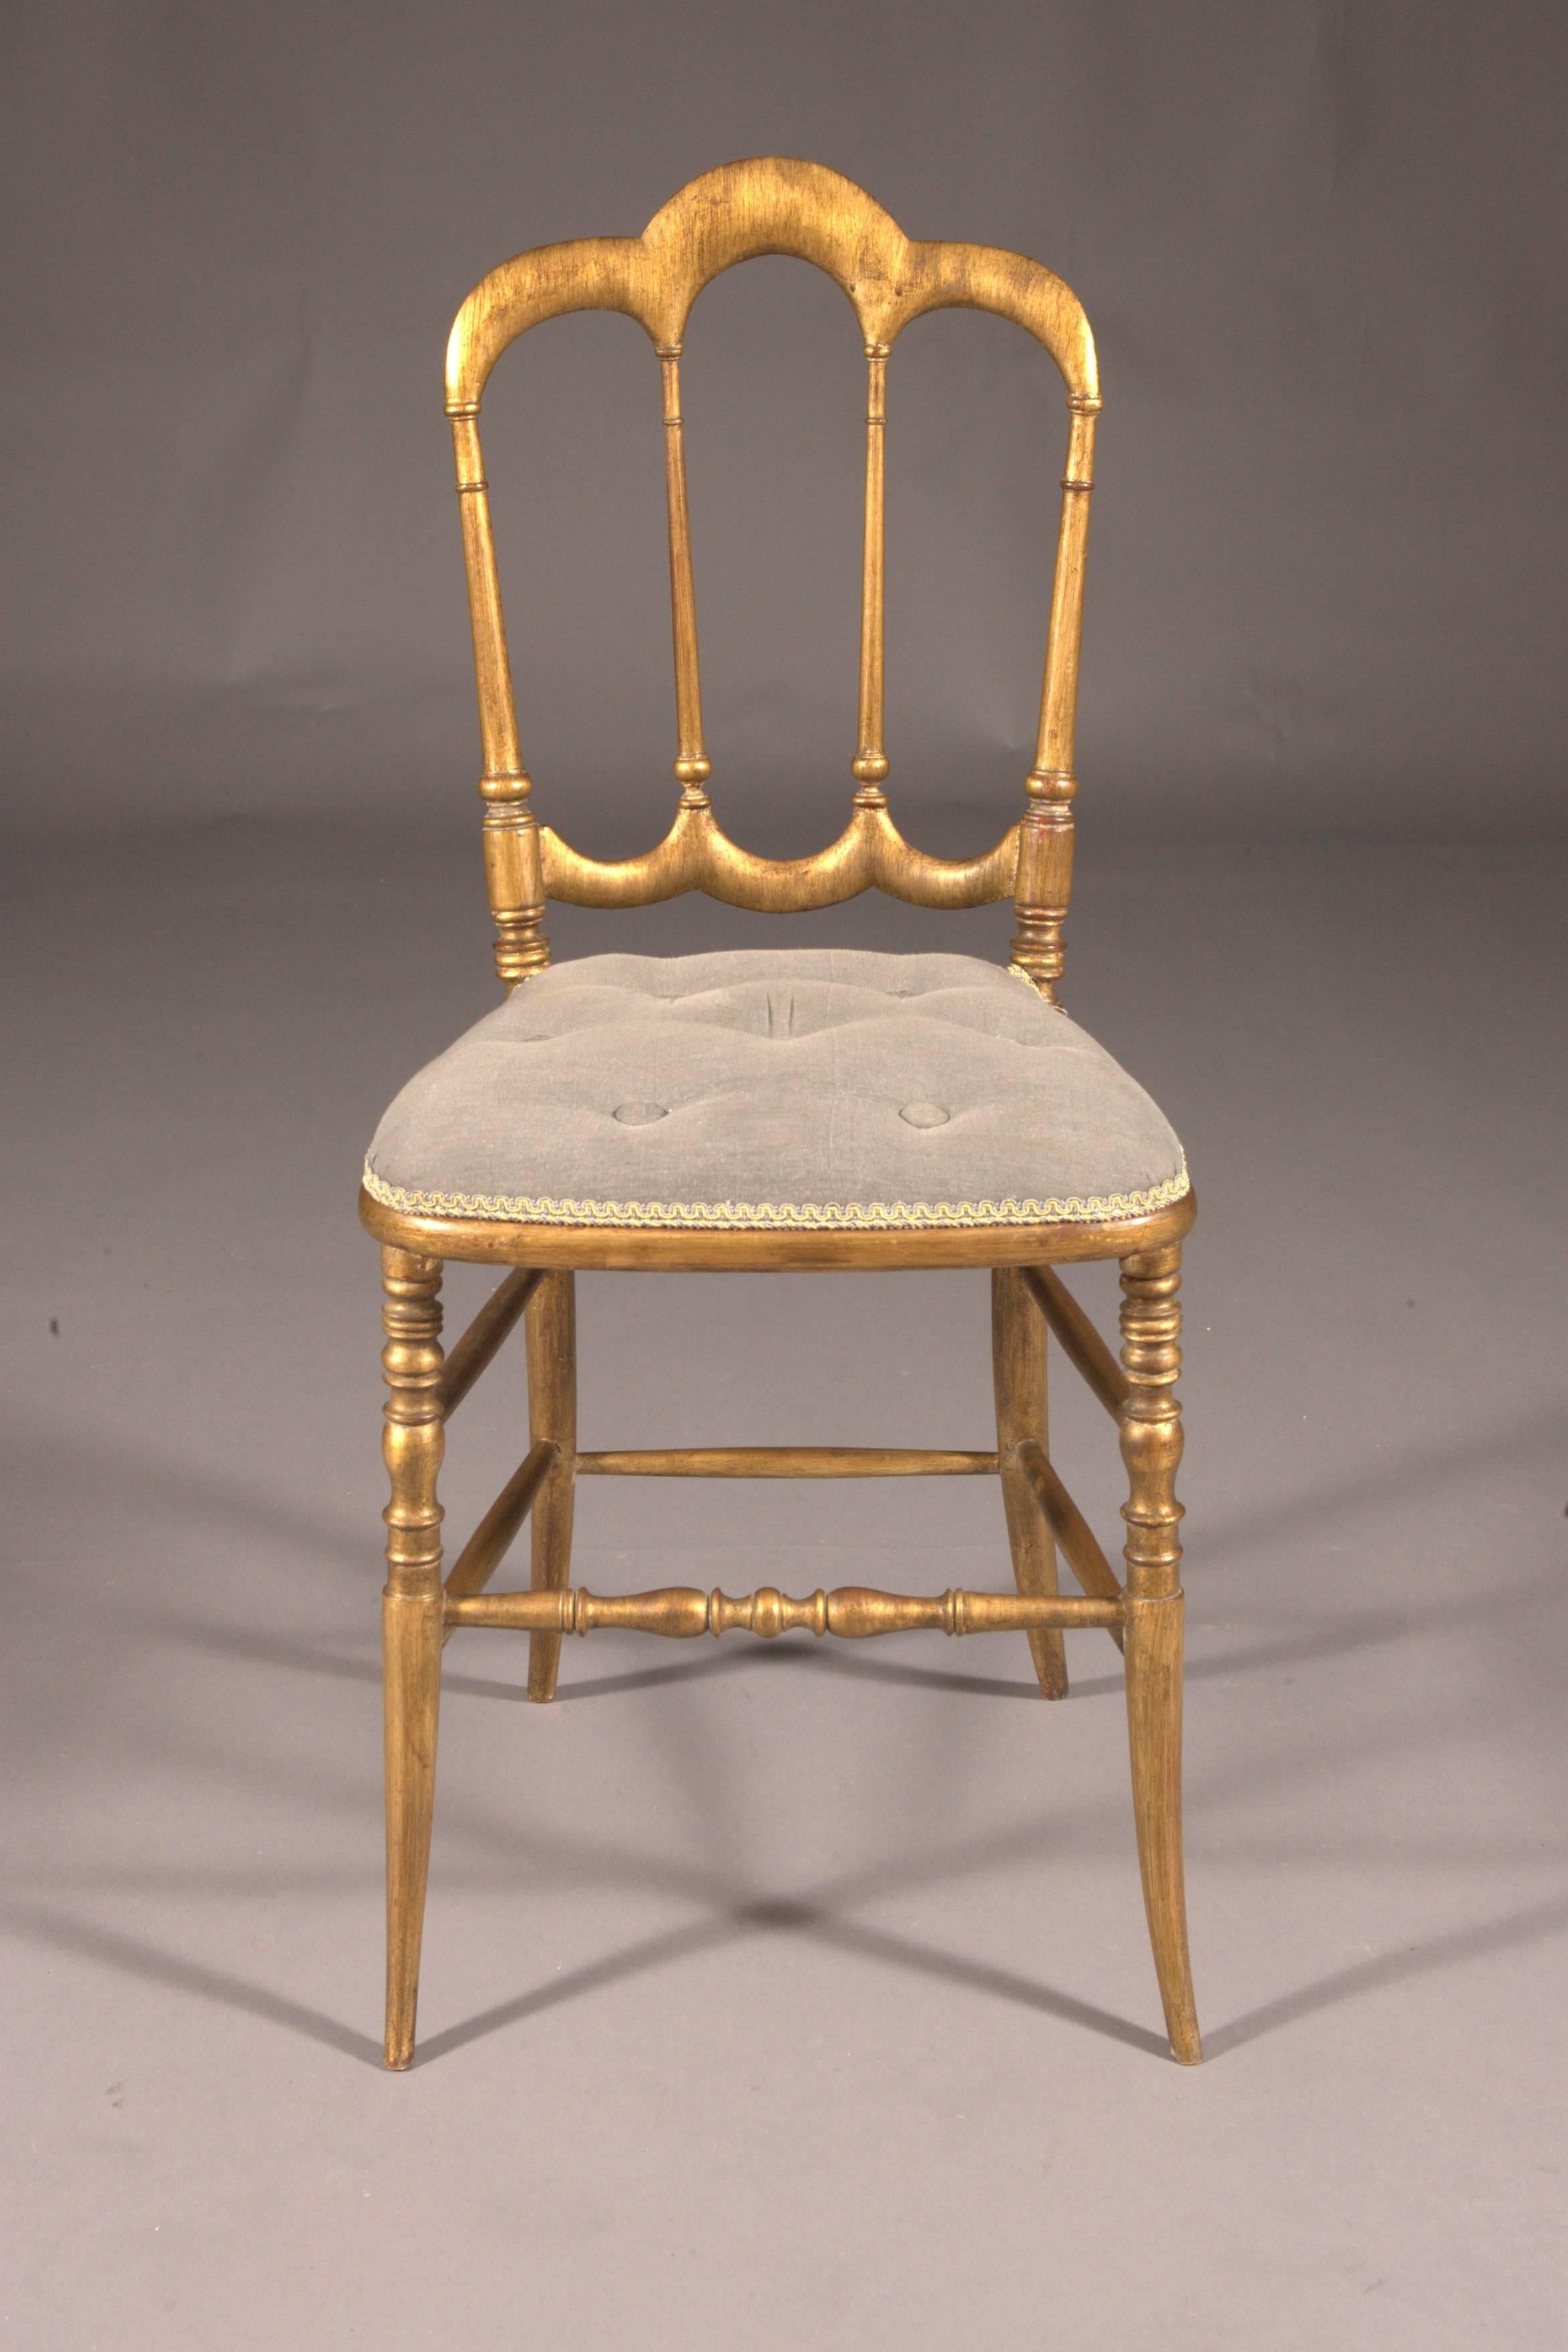 Solid beechwood, turned and grasped. Trapezoidal frame on conical balustrade-shaped legs, connected by straight struts. High backrest frame, perforated balustrade-shaped middle bars in crown form. Seat surface upholstered and covered. This chair is